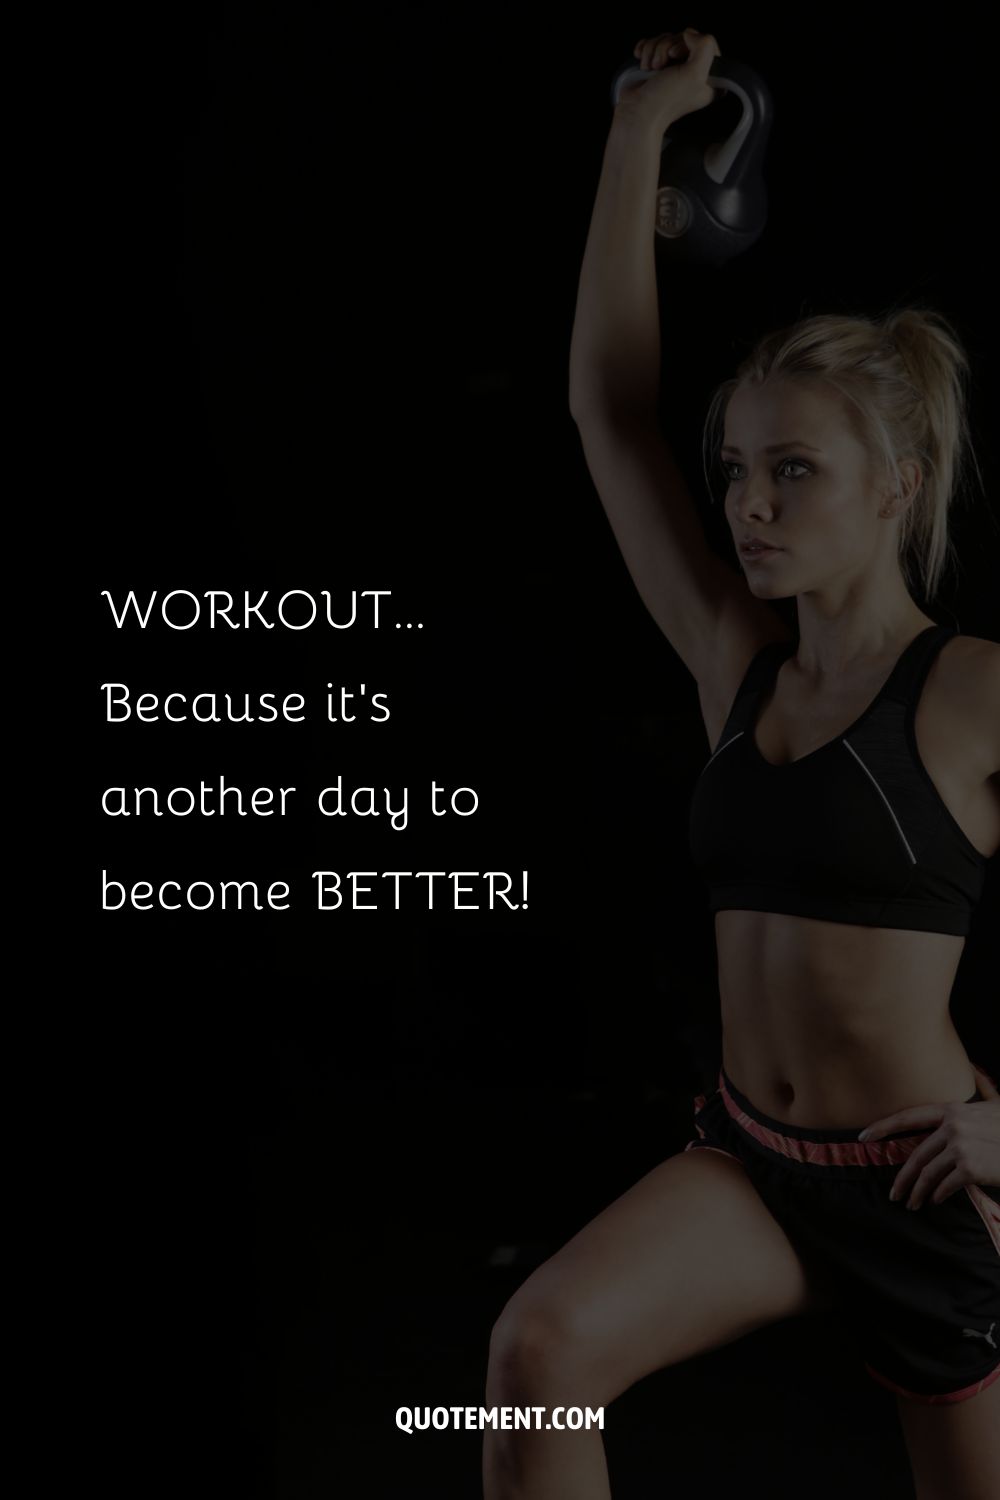 WORKOUT…Because it’s another day to become BETTER